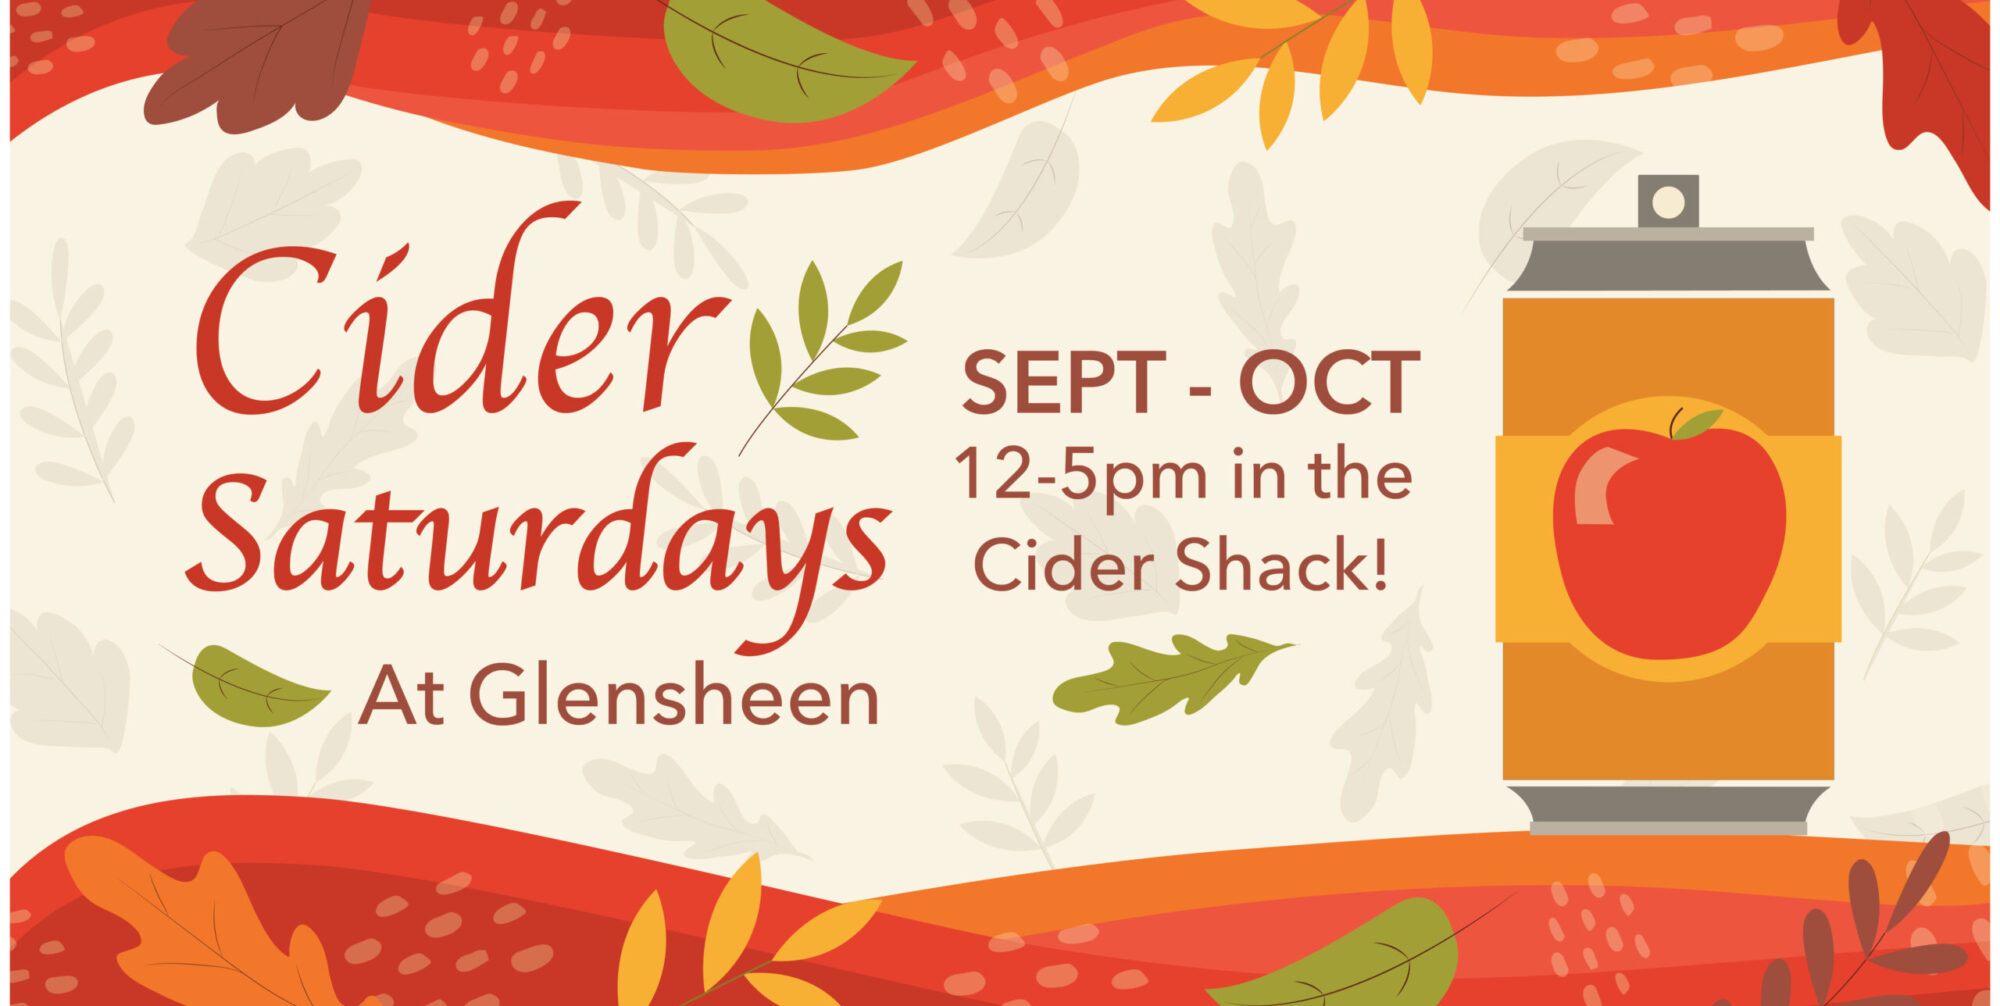 A can of cider with an apple on it and fall leaves with the text Cider Saturdays at Glensheen Sept-Oct 12-5pm in the Cider Shack